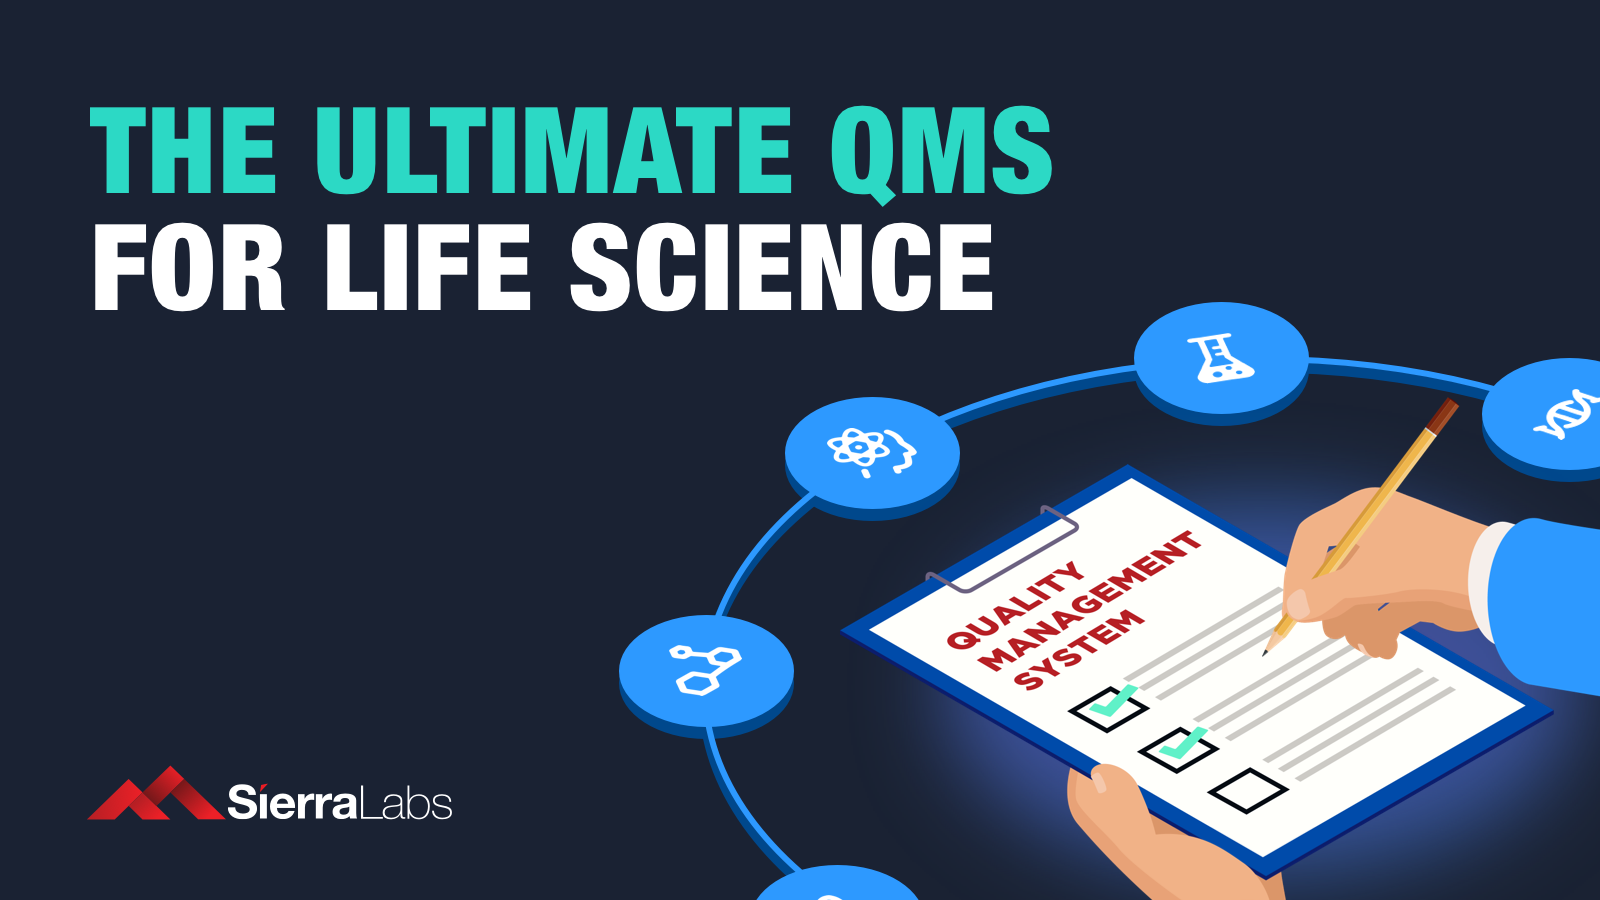 The Ultimate QMS for Life Science